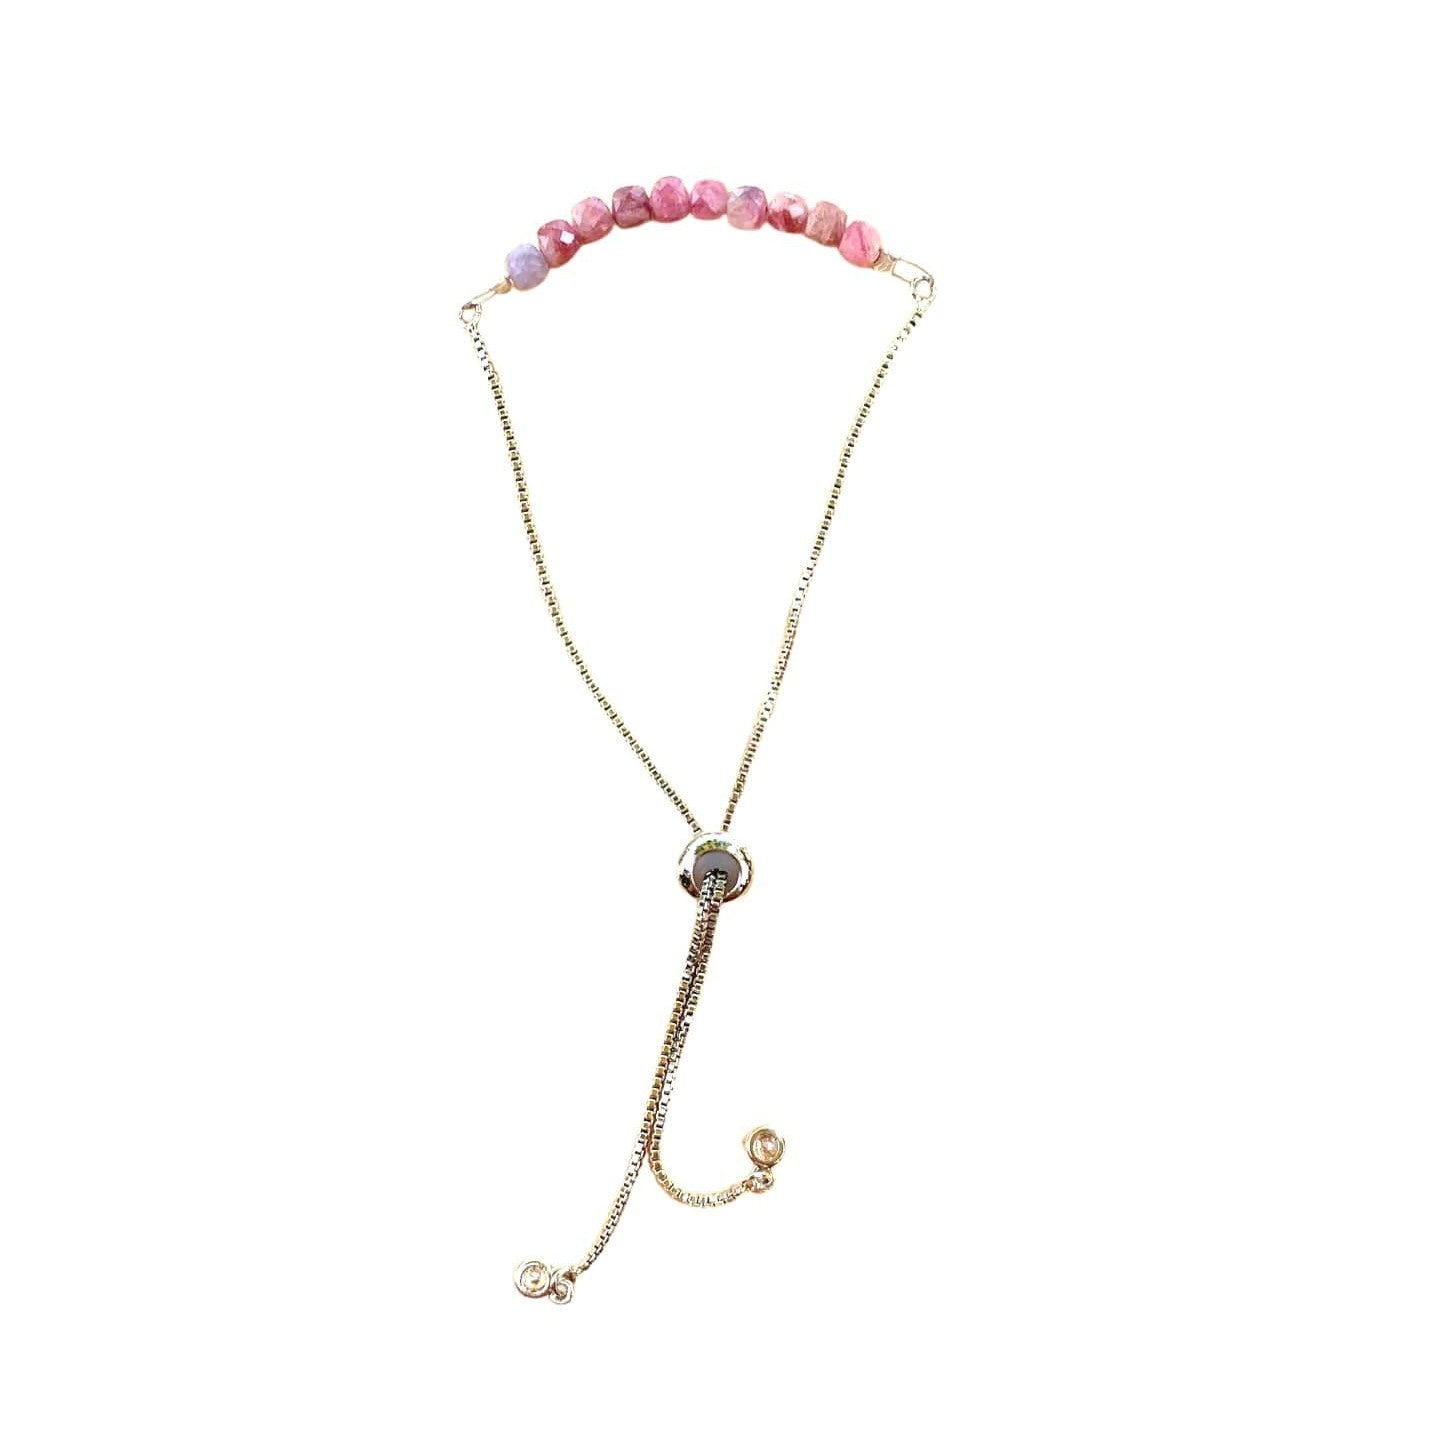 healing crystal bracelets dainty 4mm pink tourmaline with adjustable chain